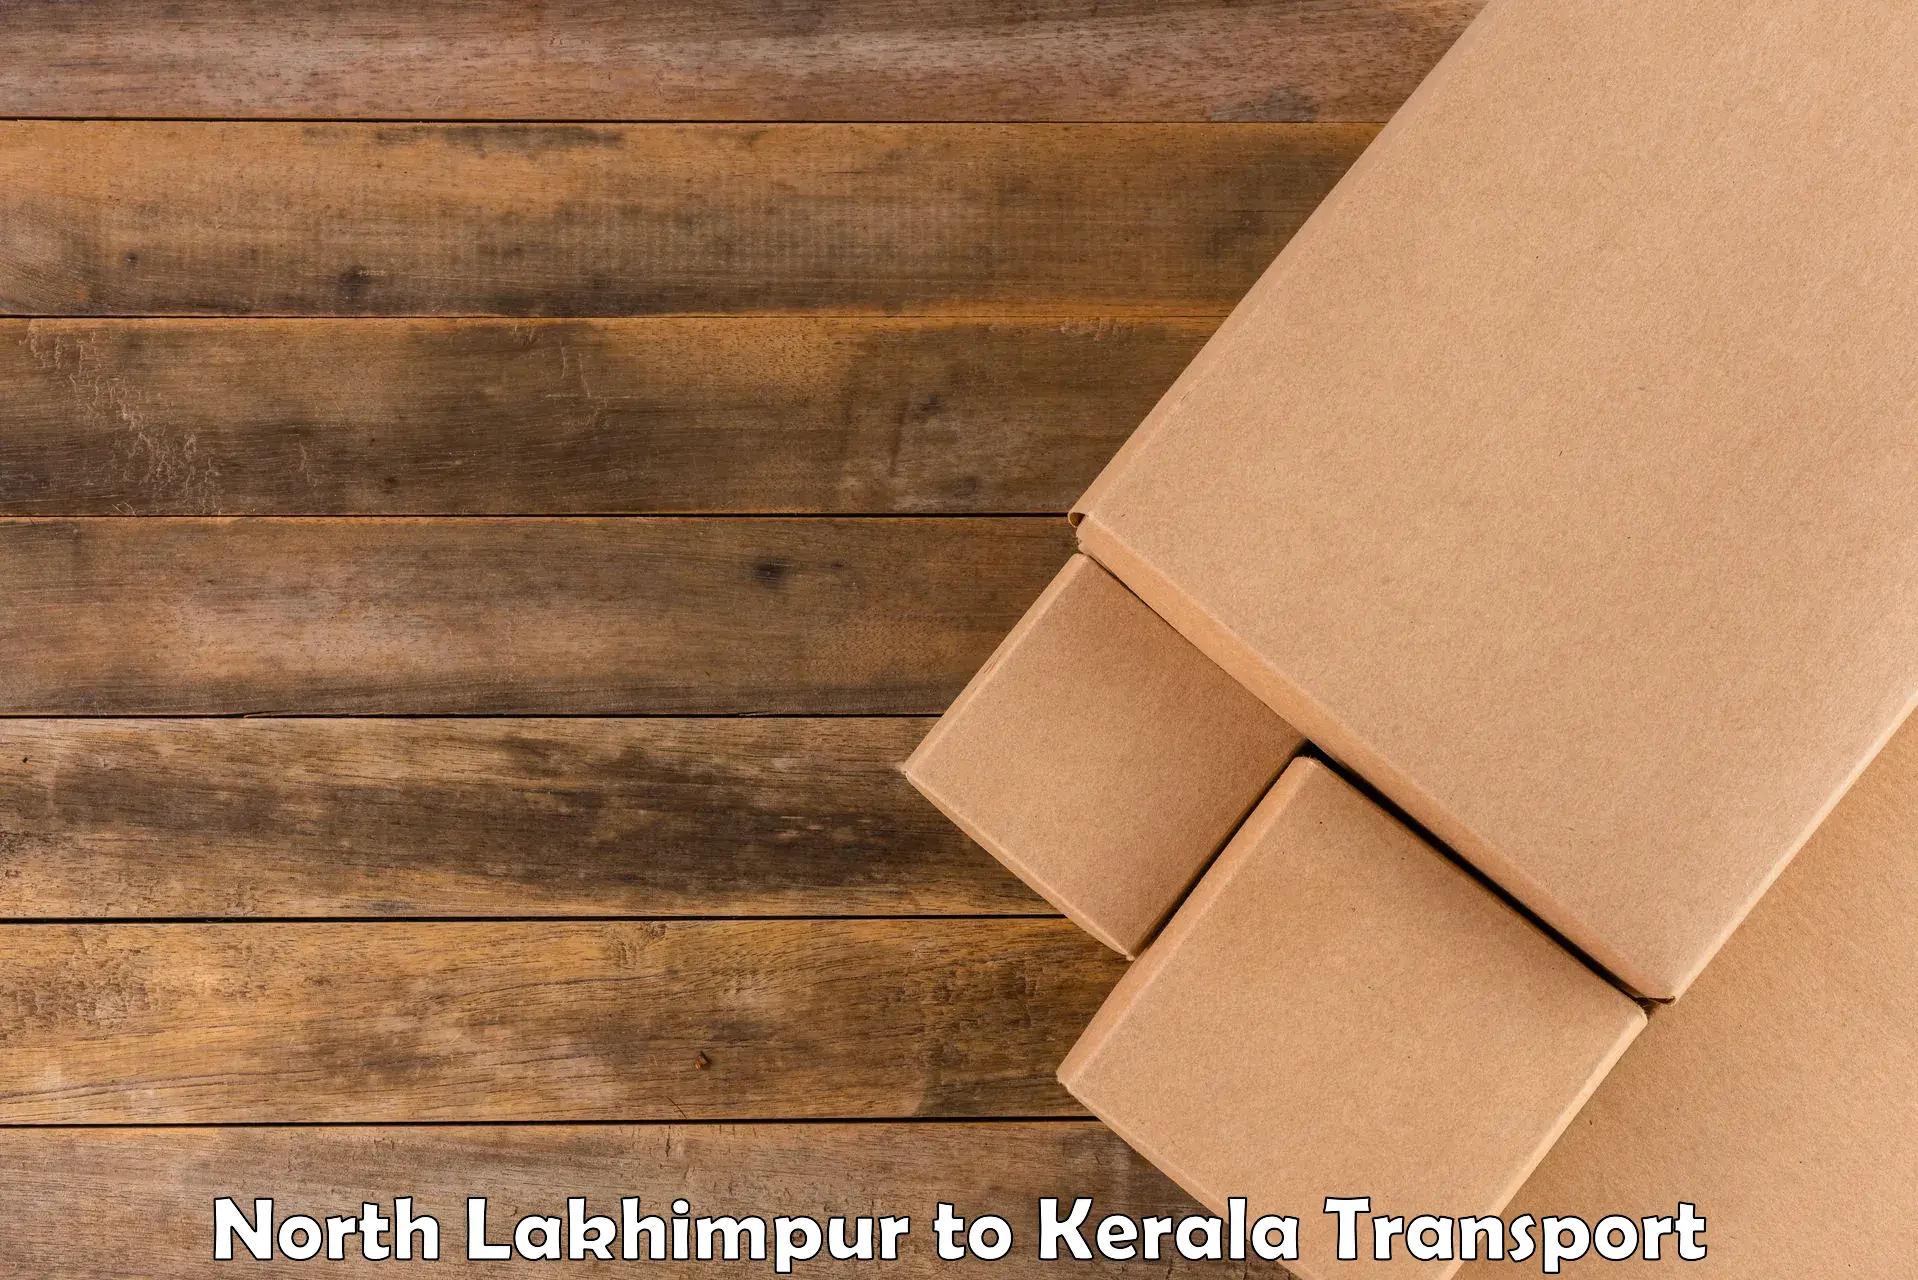 Truck transport companies in India North Lakhimpur to Punalur